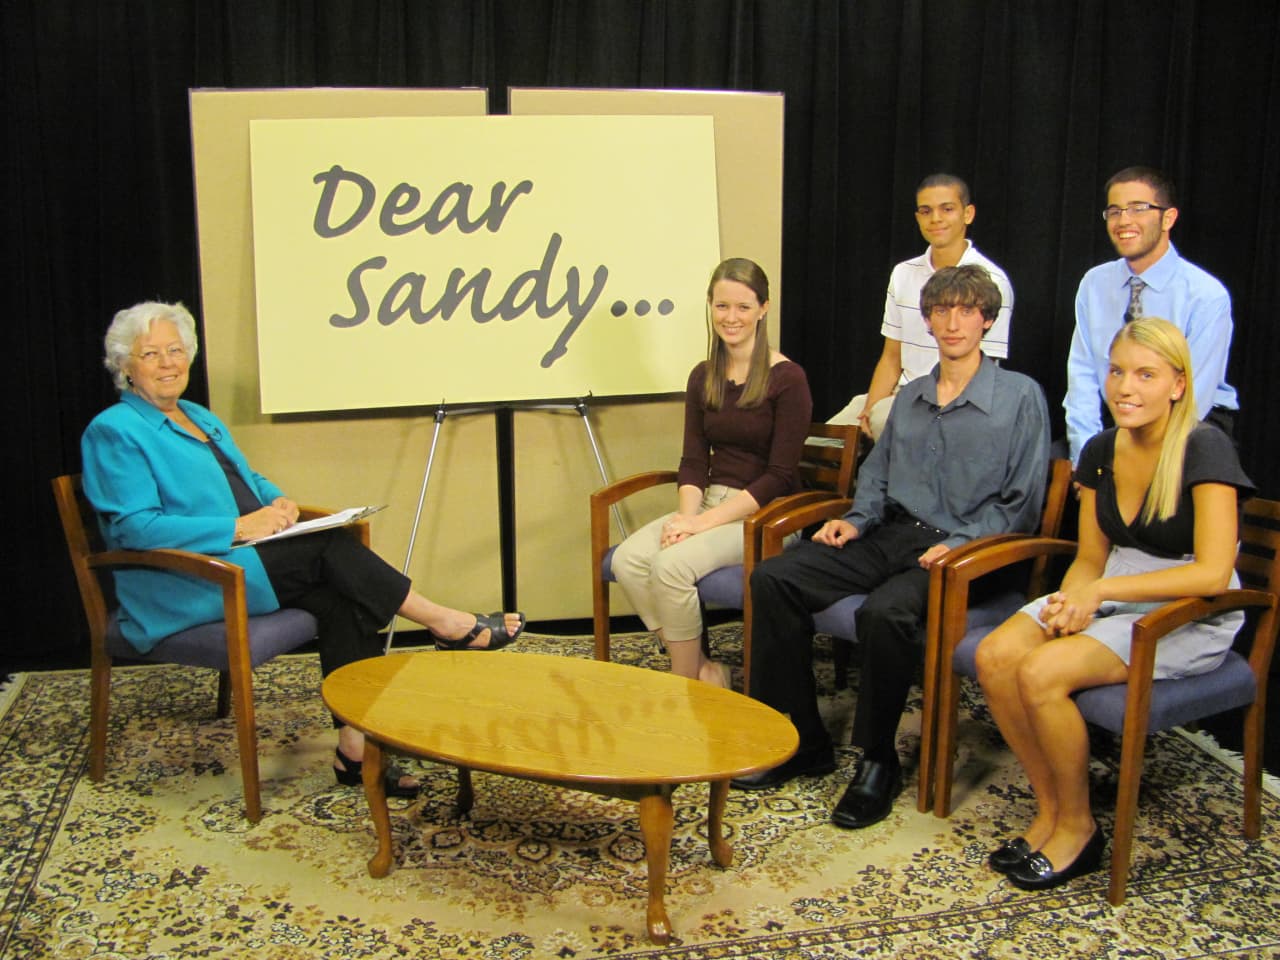 Assemblywoman Sandy Galef (far left) with five of her recent interns, Jeffrey Guzman (back left), Ross Beroff (back right), Alanna Powers (front left), Brendan Zarkower (front center) and Cat Purdy (front right) on the set of Dear Sandy.